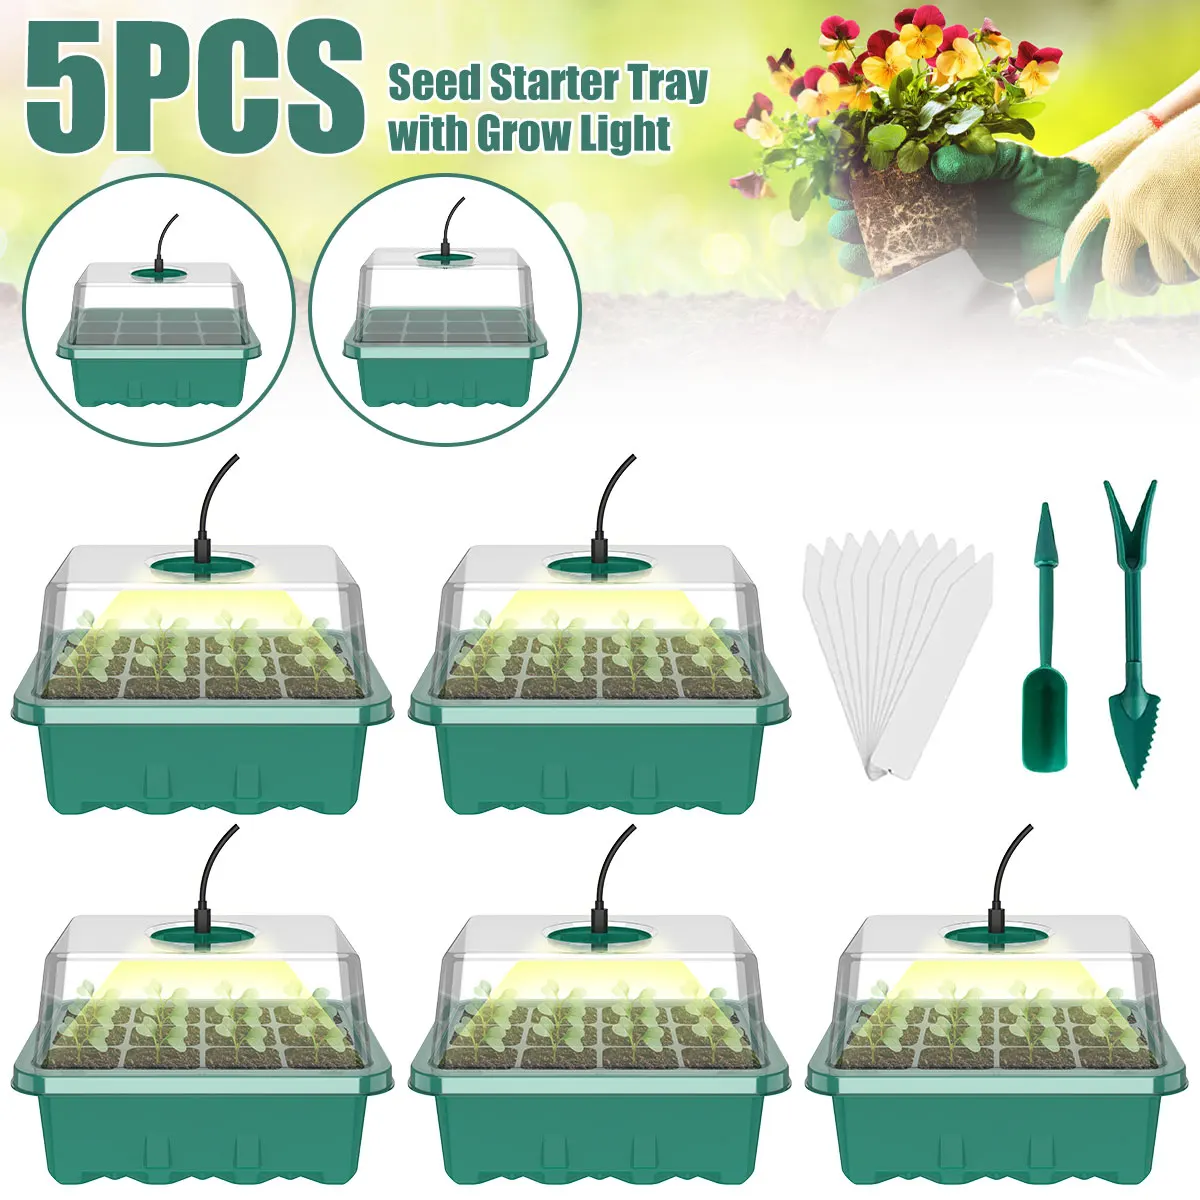 

5Pcs Seed Starter Trays With Grow Light Seeding Starter Kits With Humidity Domes Cover Indoor Gardening Plant Germination Trays